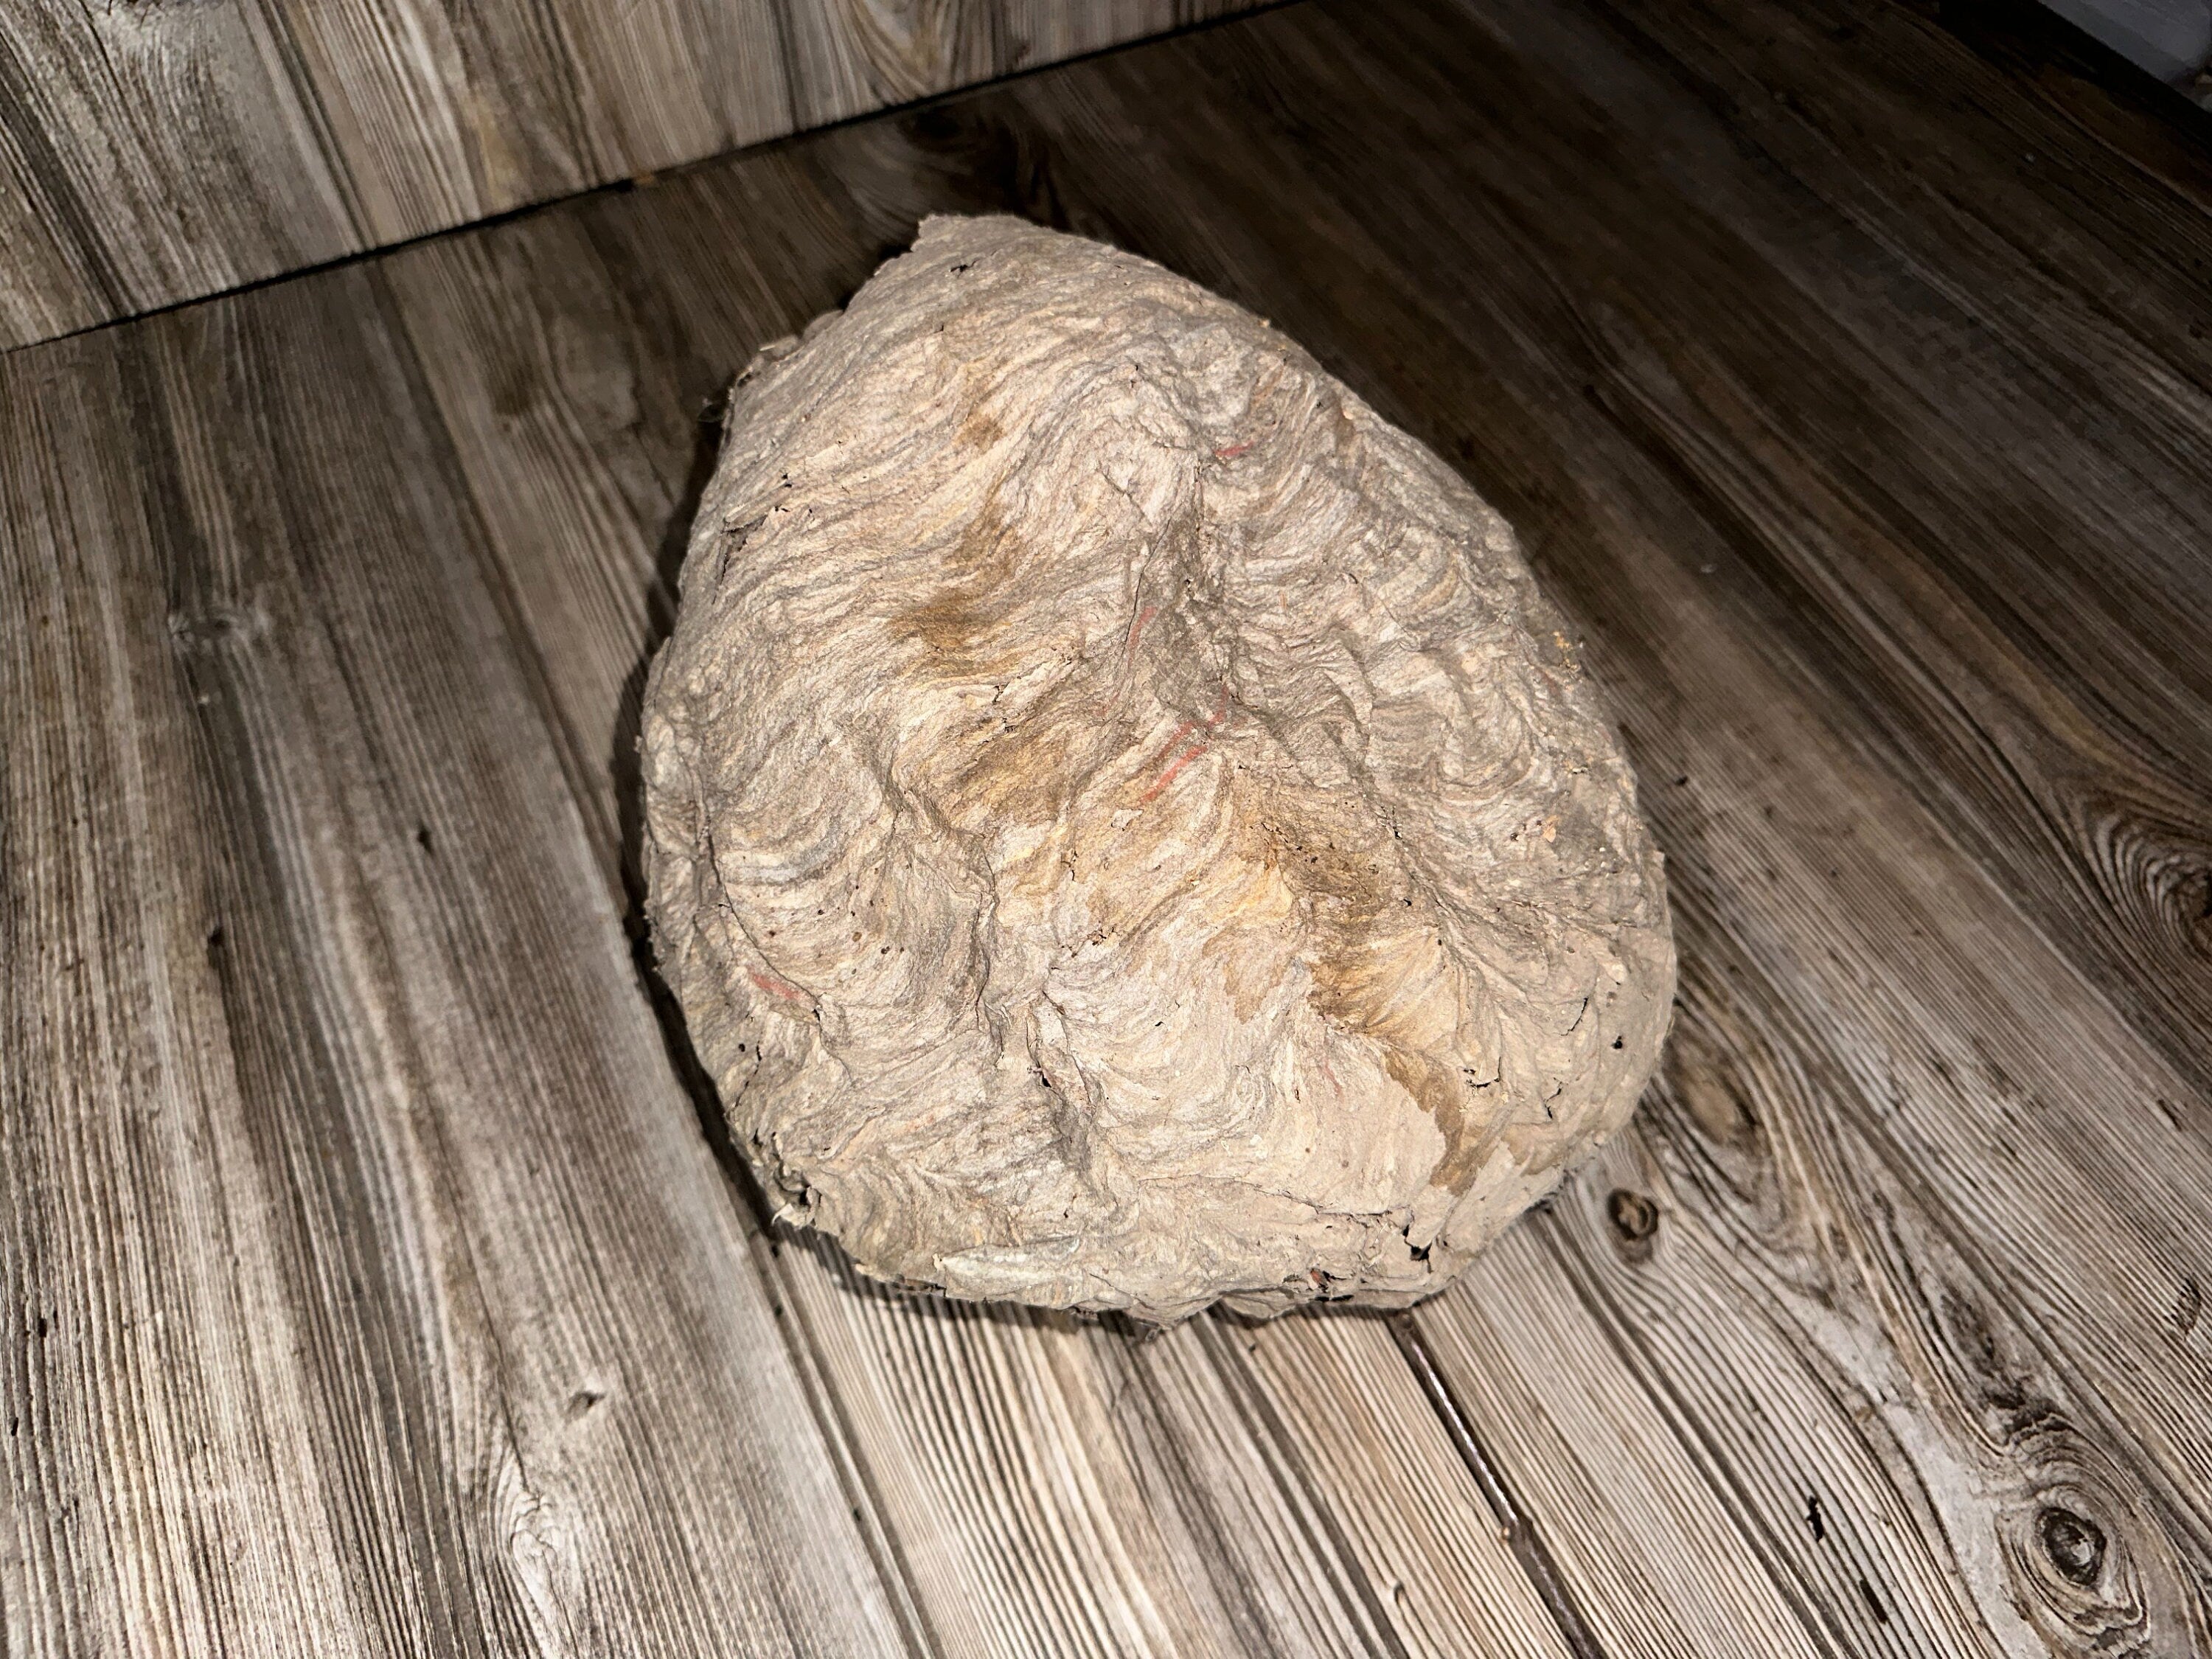 Paper Wasp Nest, Bee Hive with Branches, Approximately 12 Inches Tall by 10 Inches Wide and 8 Inches High